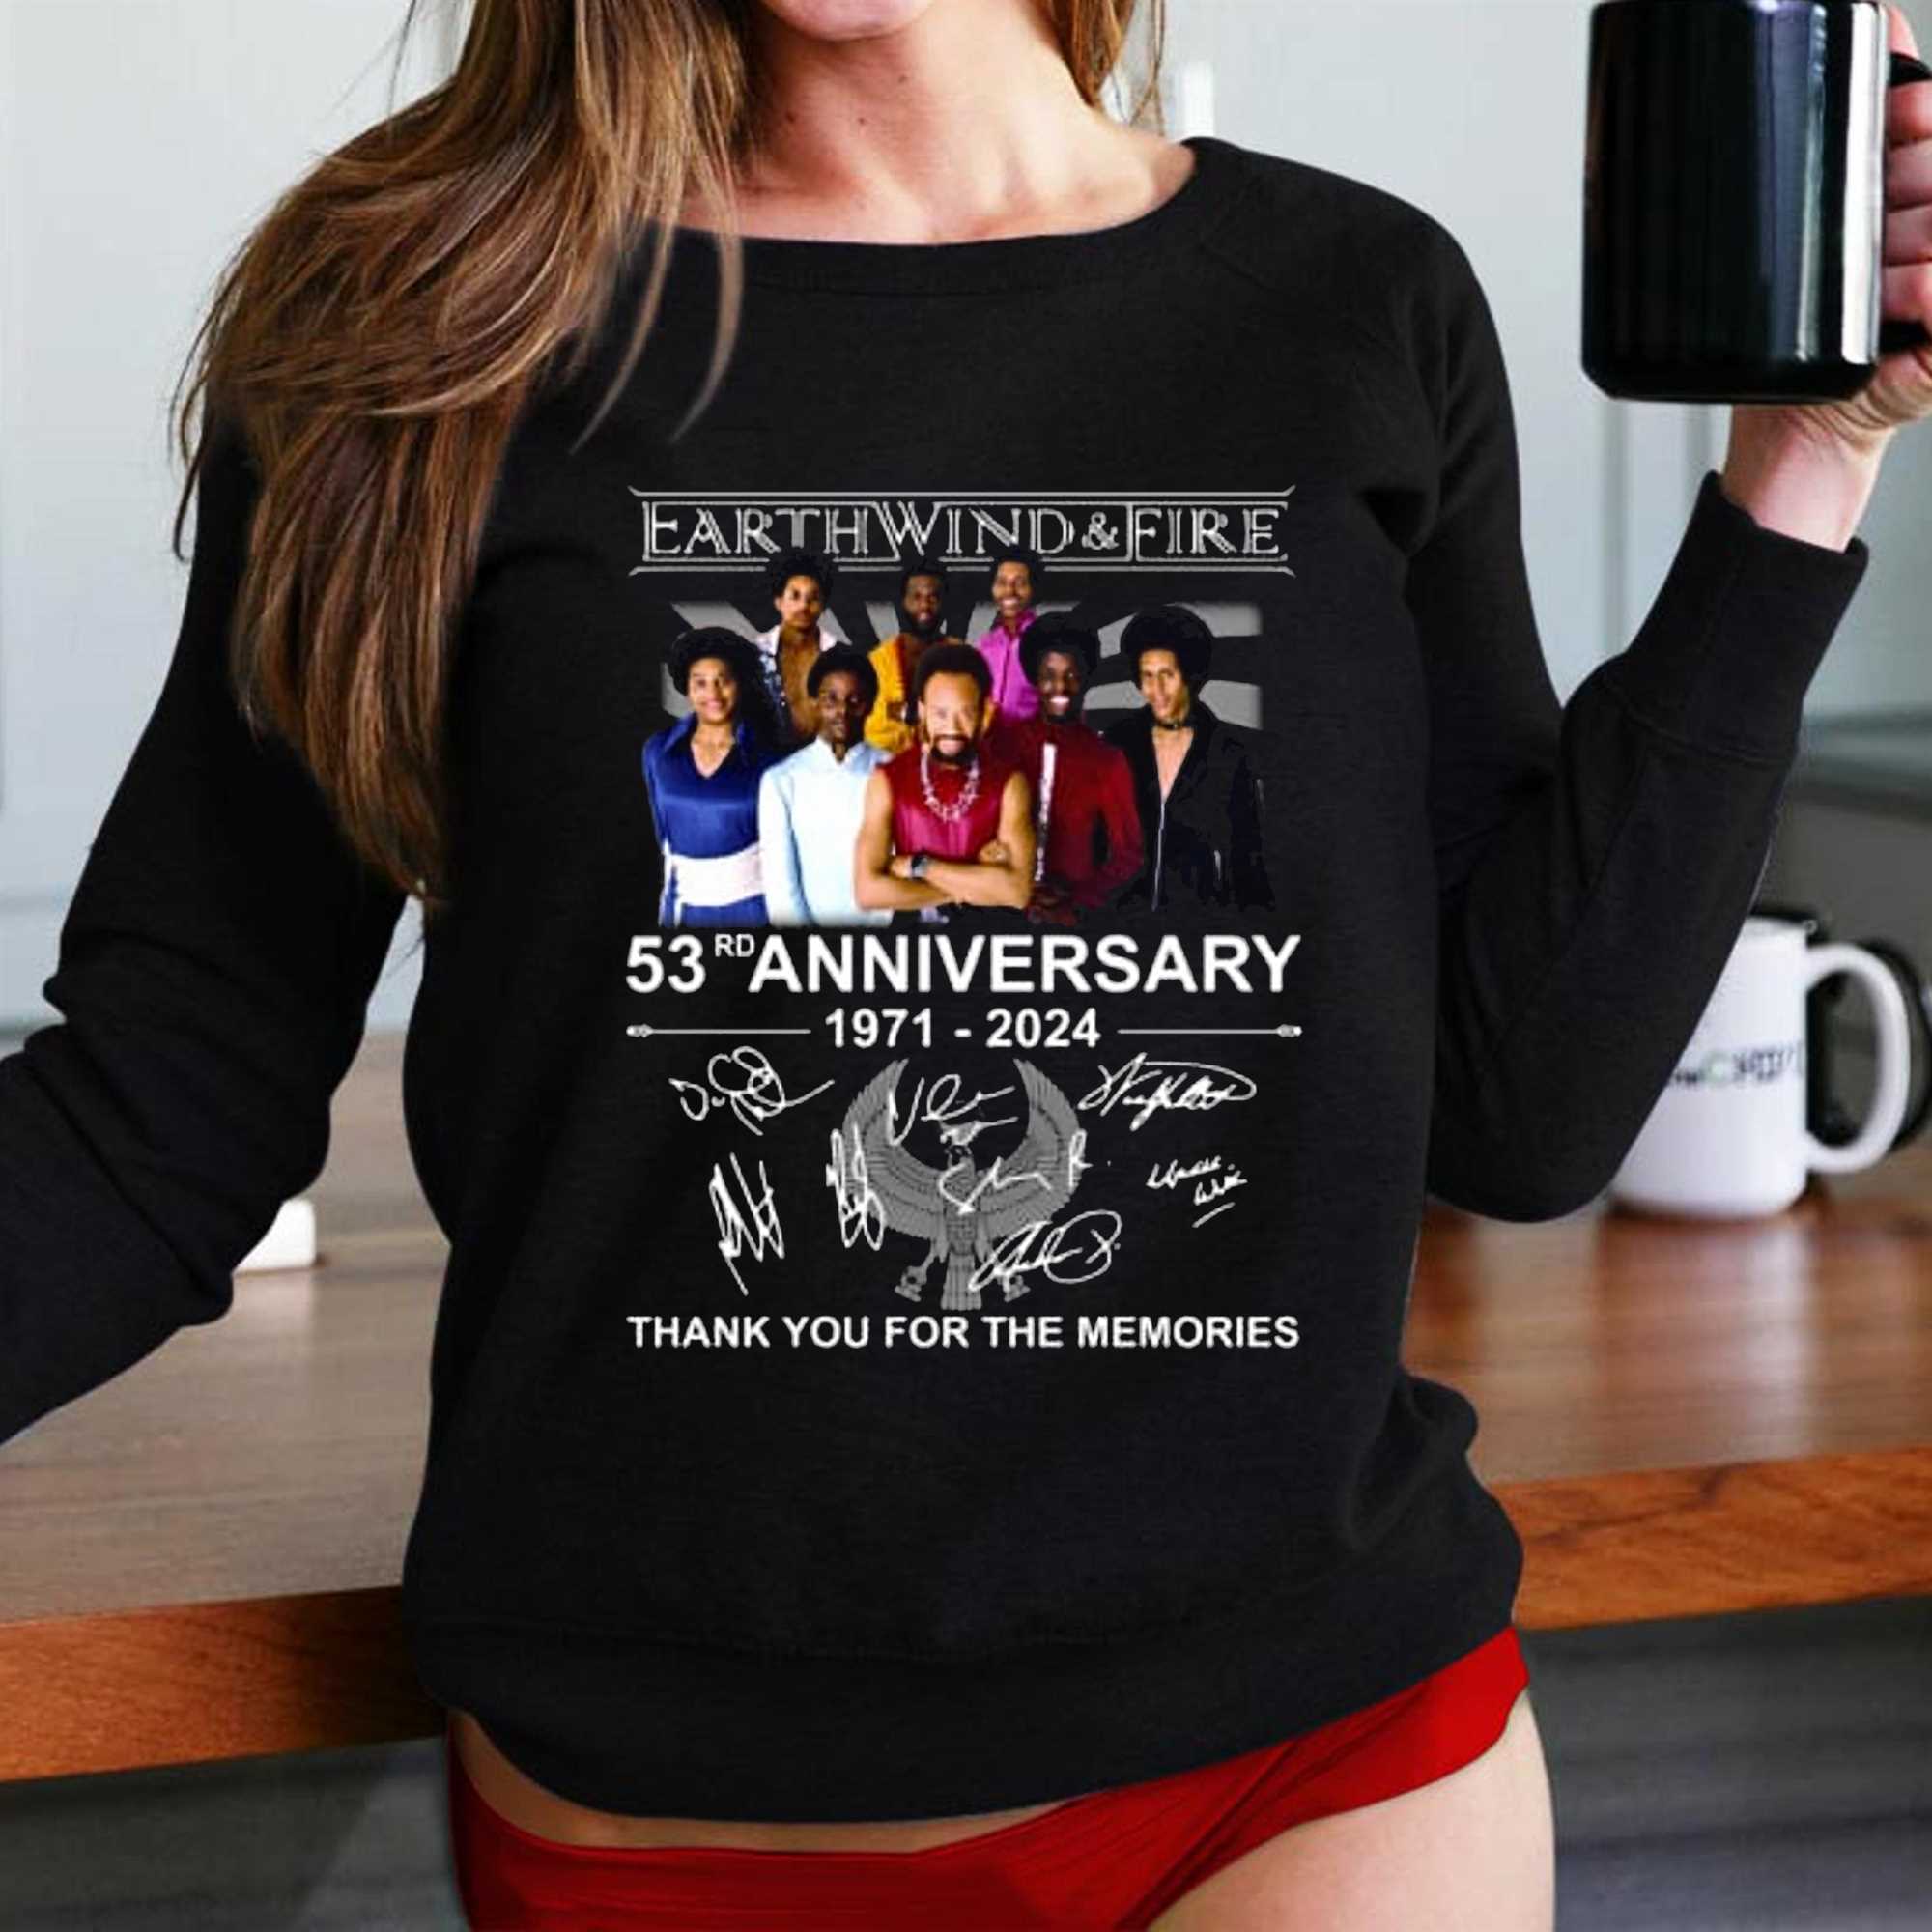 Earth Wind & Fire 53rd Anniversary 1971-2024 Thank You For The Memories T-shirt 